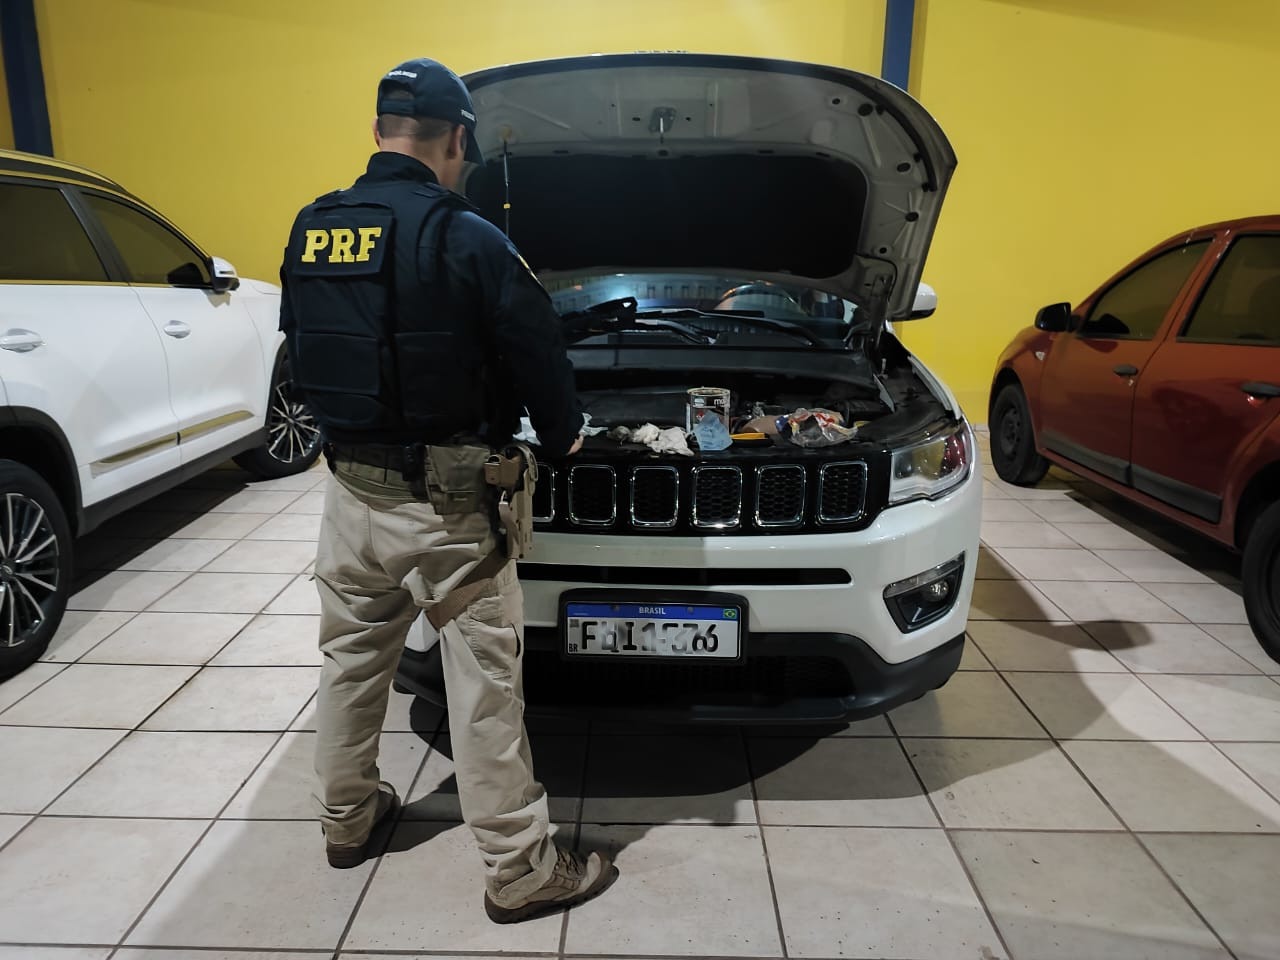 Jeep/Compass was found in Biguaçu after being stolen in Sao Paulo – PRF/Reproduction/ND